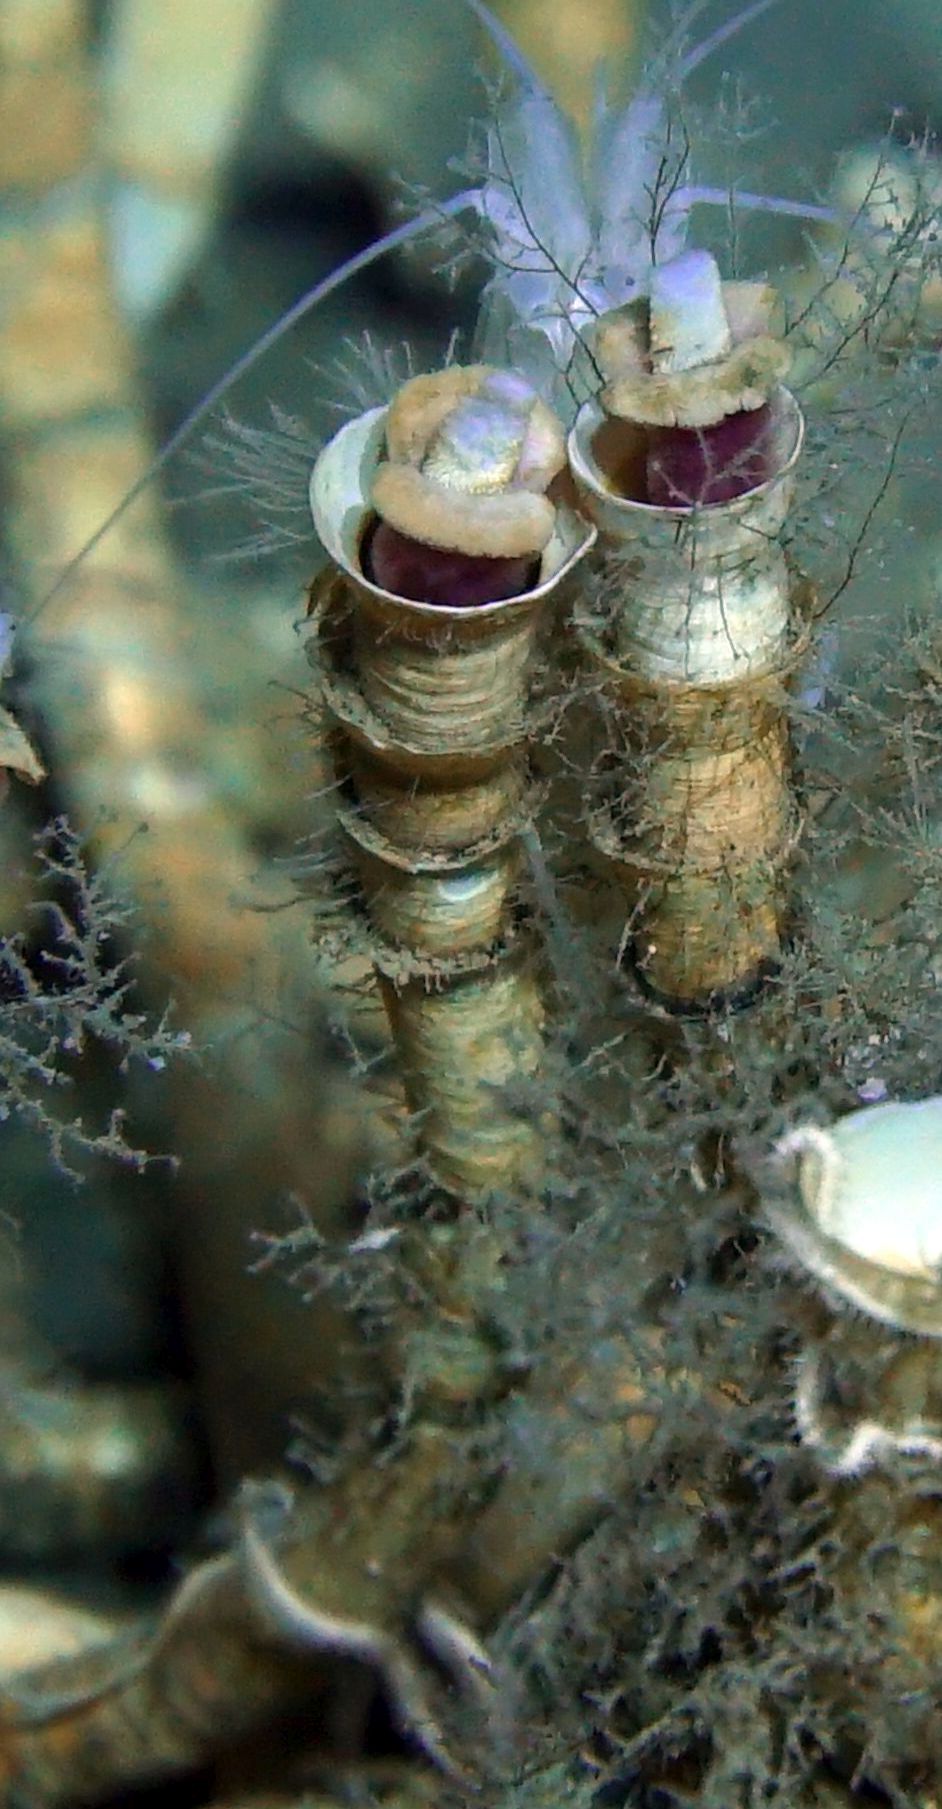 Tubeworms's tube - a unique supporting structure for them to acquire inorganic matter from the seabed, from which allows their co-living bacteria to produce organic nutrients.